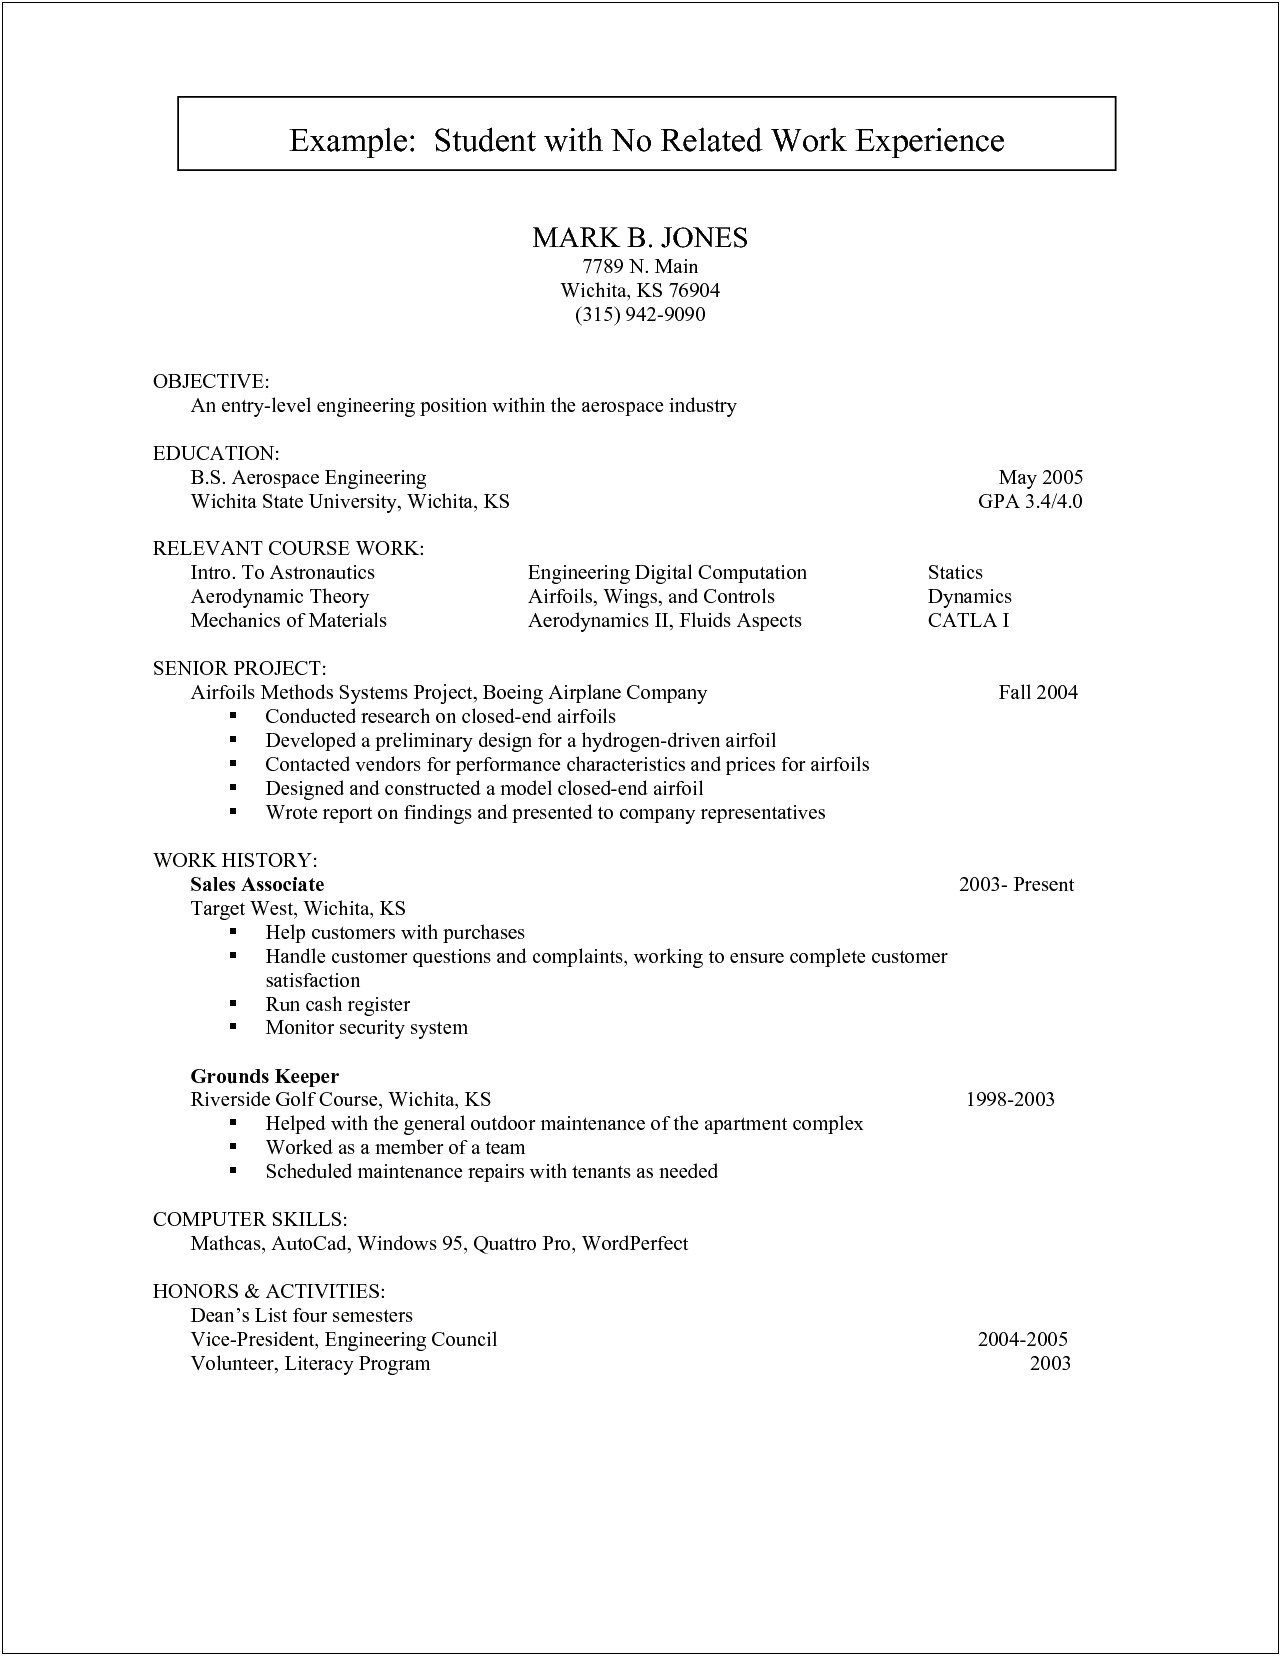 Sample Resume For Student With No Job Experience